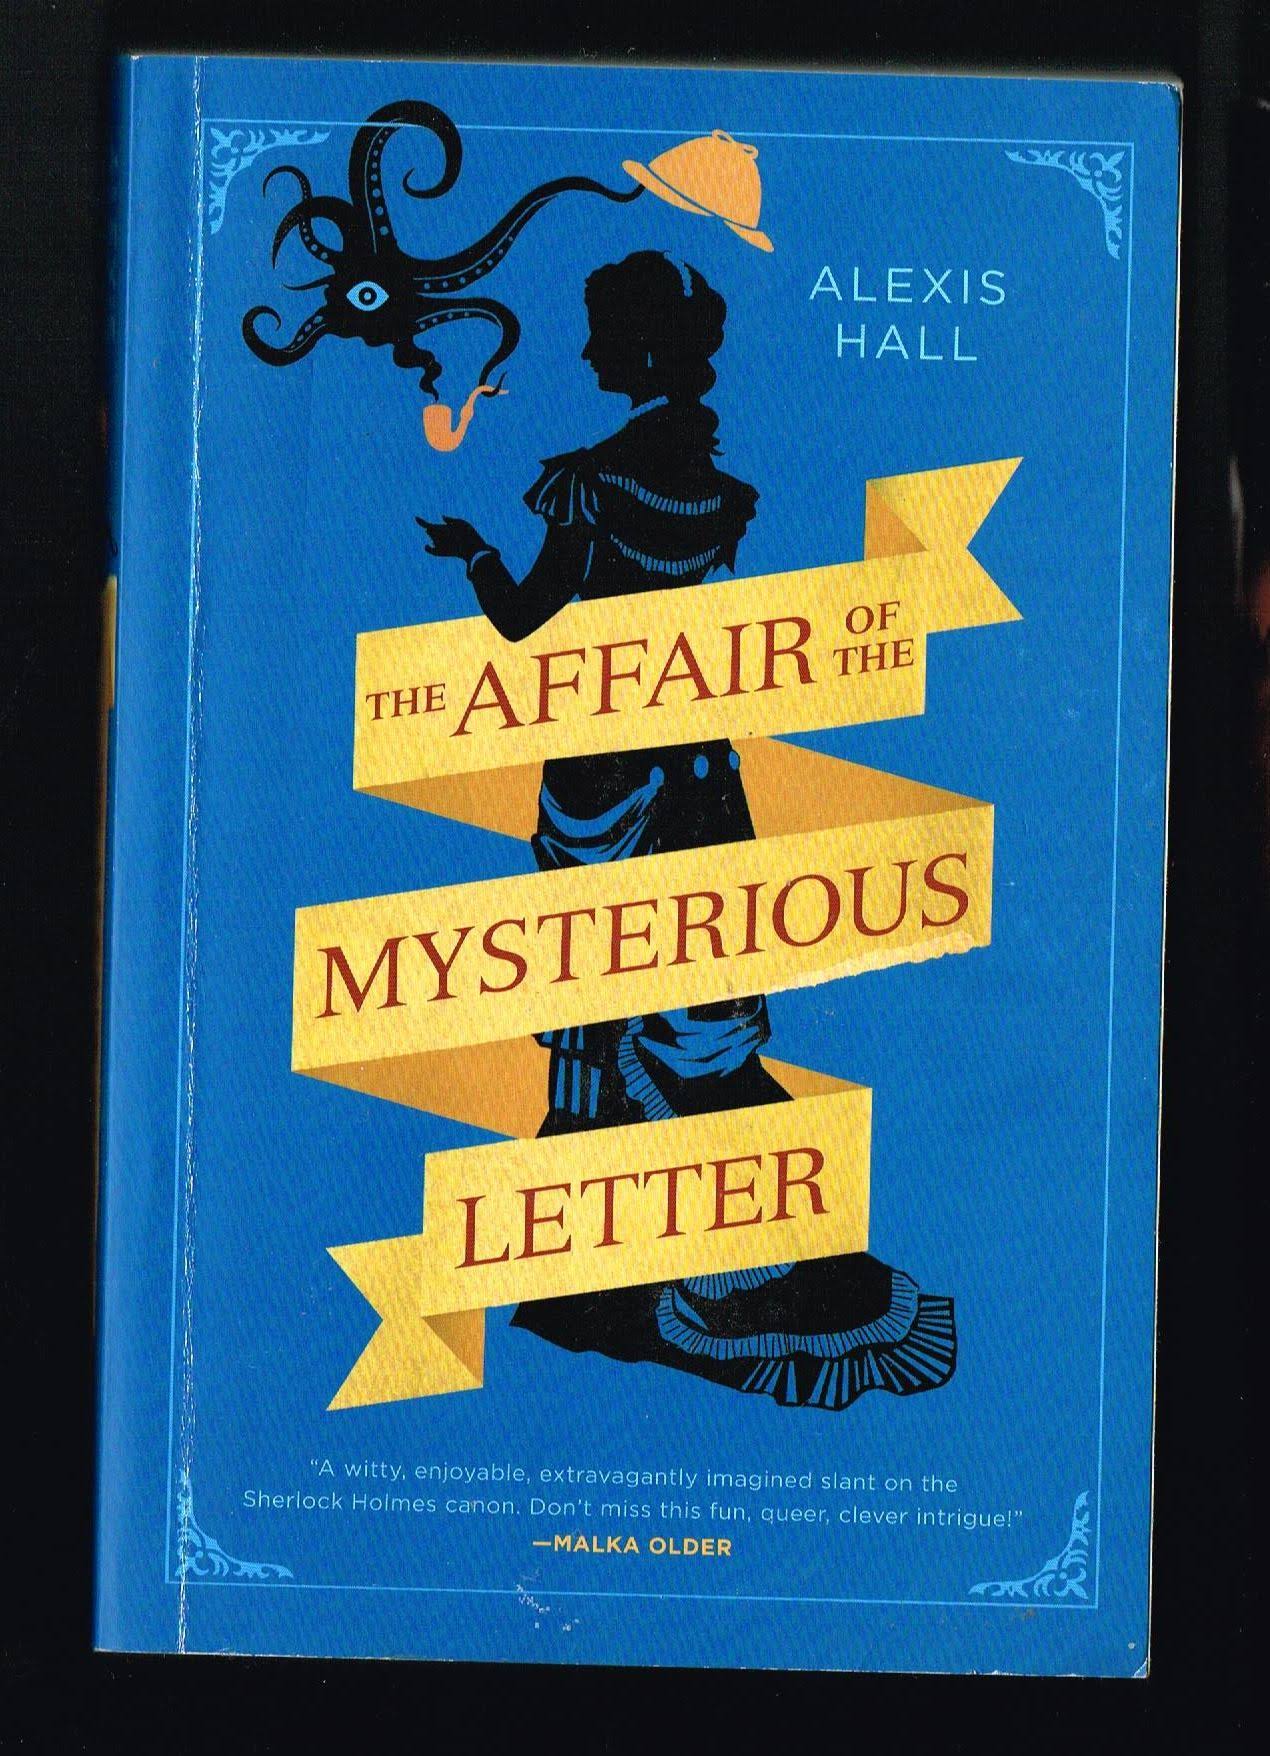 The Affair of the Mysterious Letter [Book]